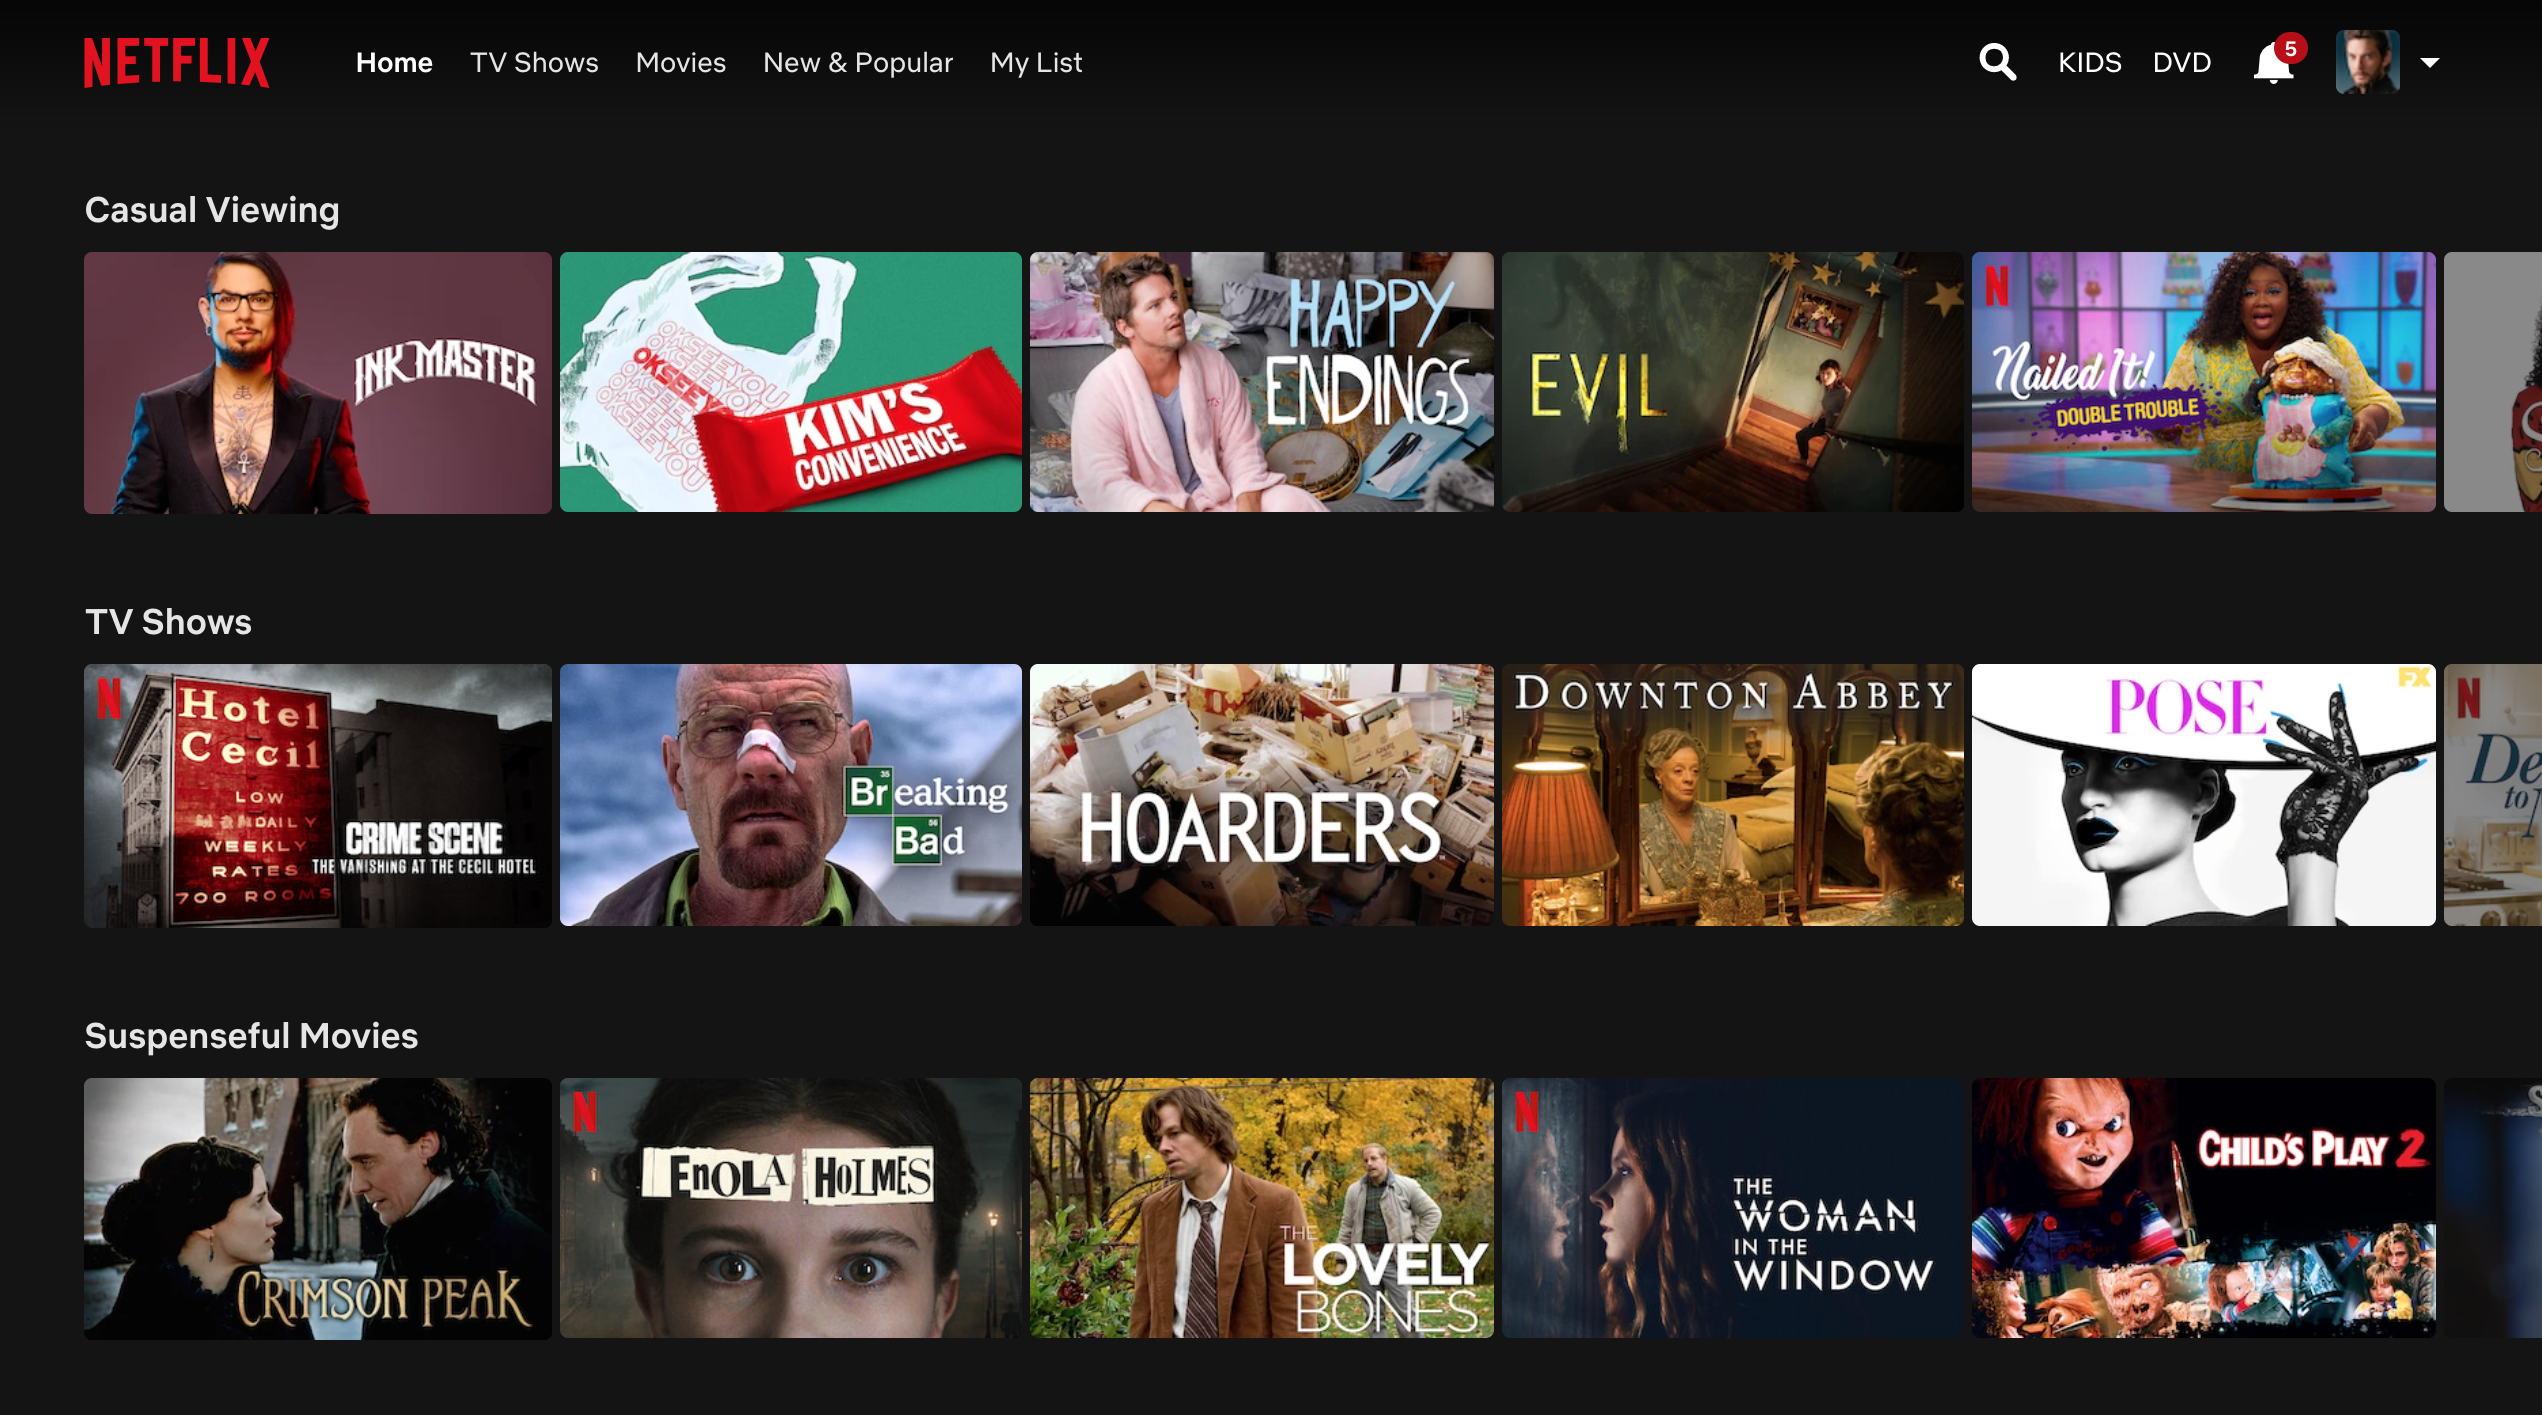 Thumbnails of various shows and movies on Netflix.